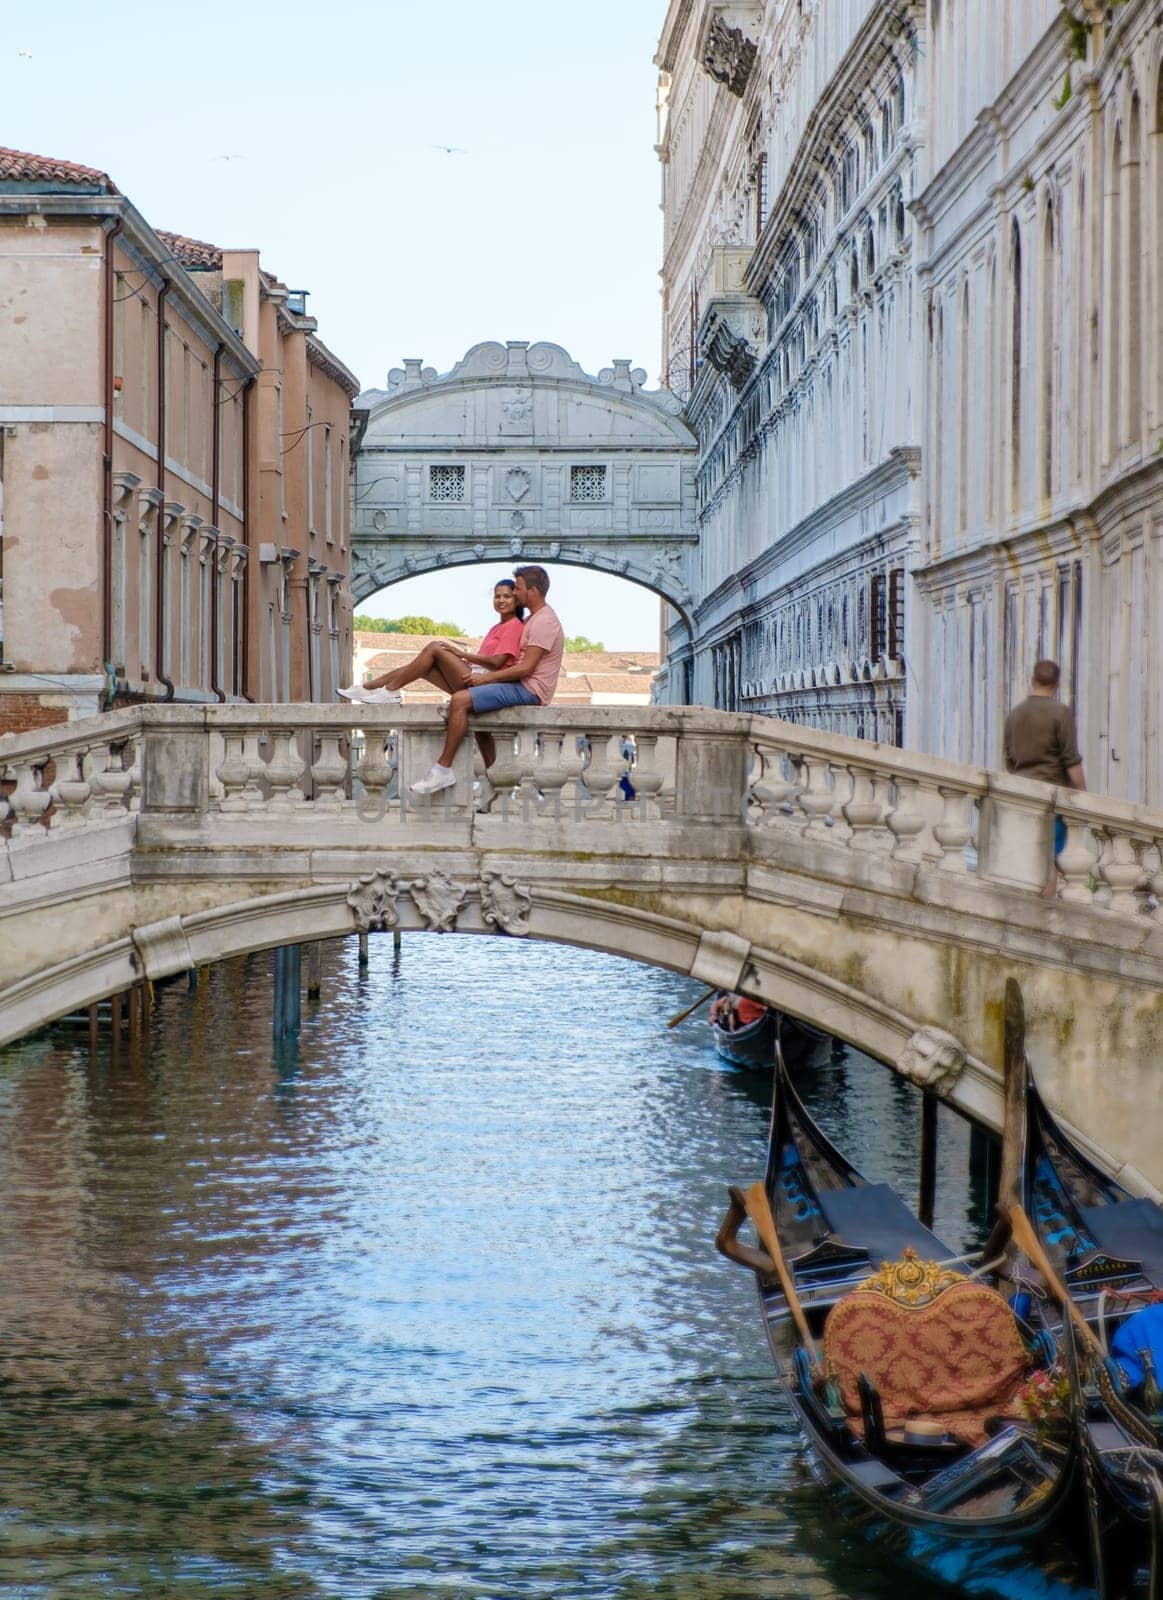 a couple of men and women on a city trip in Venice Italy sitting at a bridge in Venice, Italy. Architecture and landmark of Venice. cityscape of Venice Italy during summer